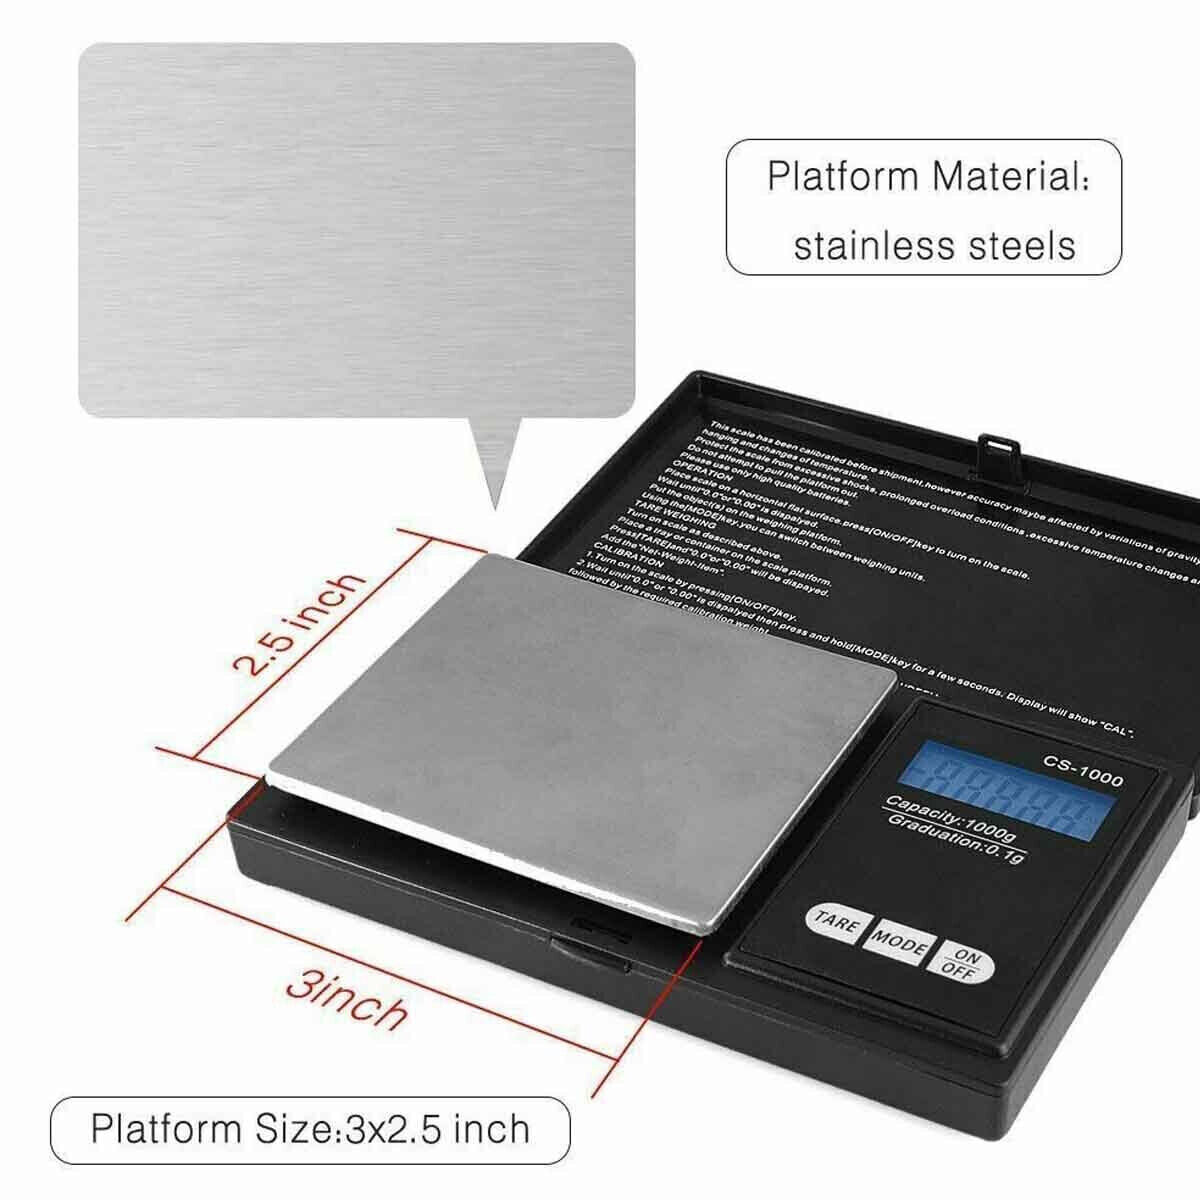 Great Choice Products Digital Scale 1000G X 0.1G Jewelry Gold Silver Coin Gram Pocket Size Herb Grain